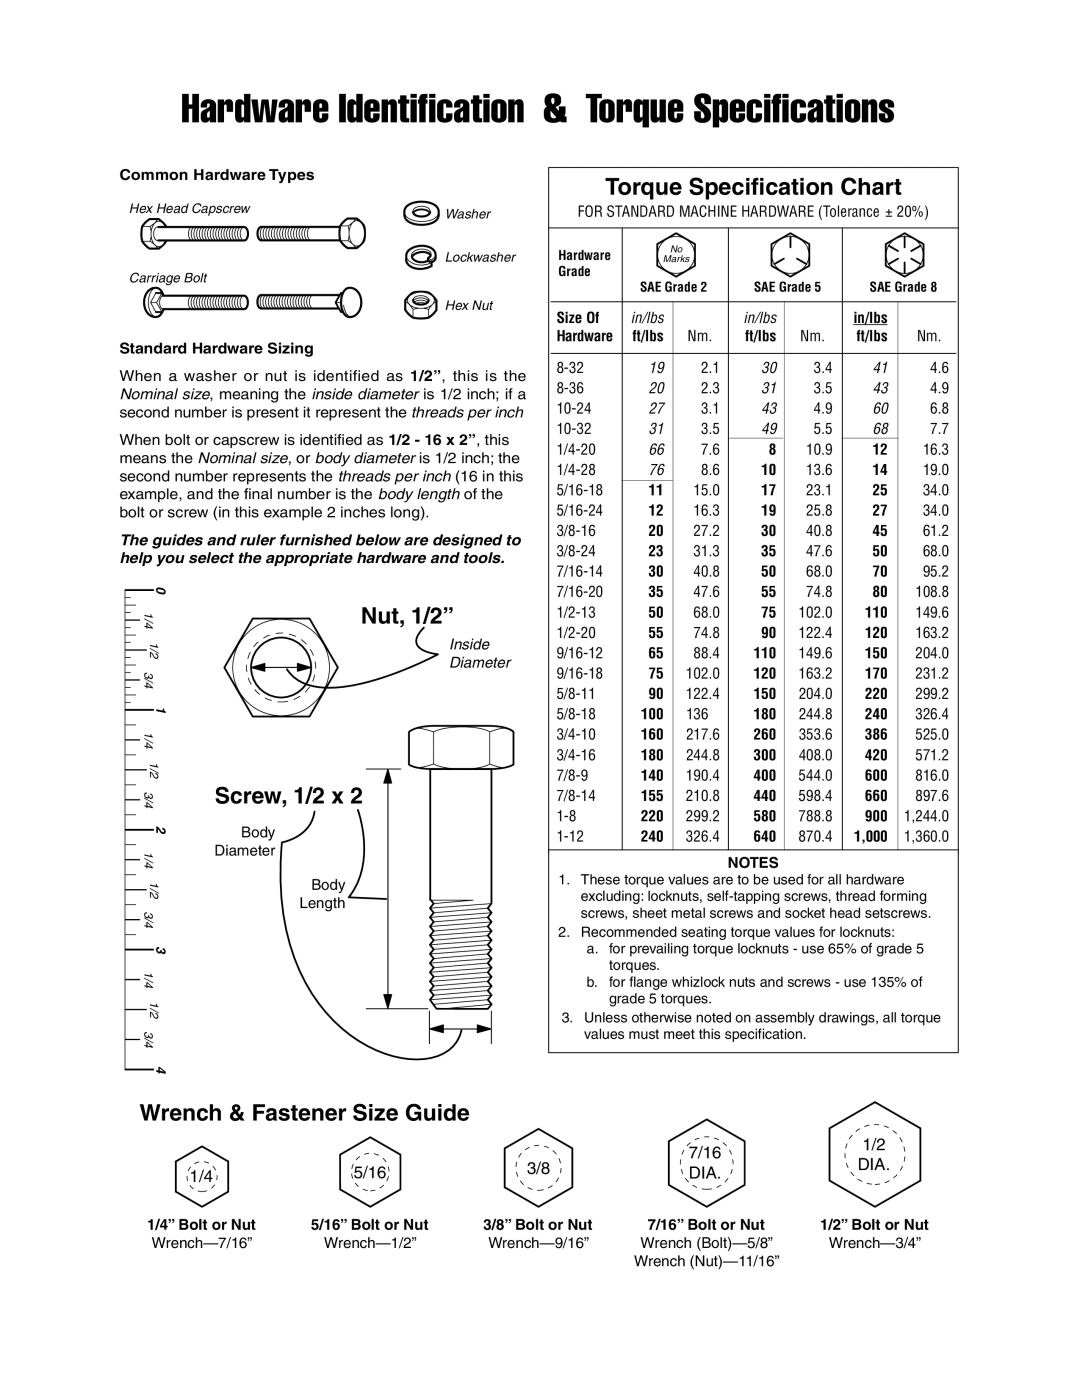 Snapper 4565 Wrench & Fastener Size Guide, Hardware Identification & Torque Specifications, Torque Specification Chart 